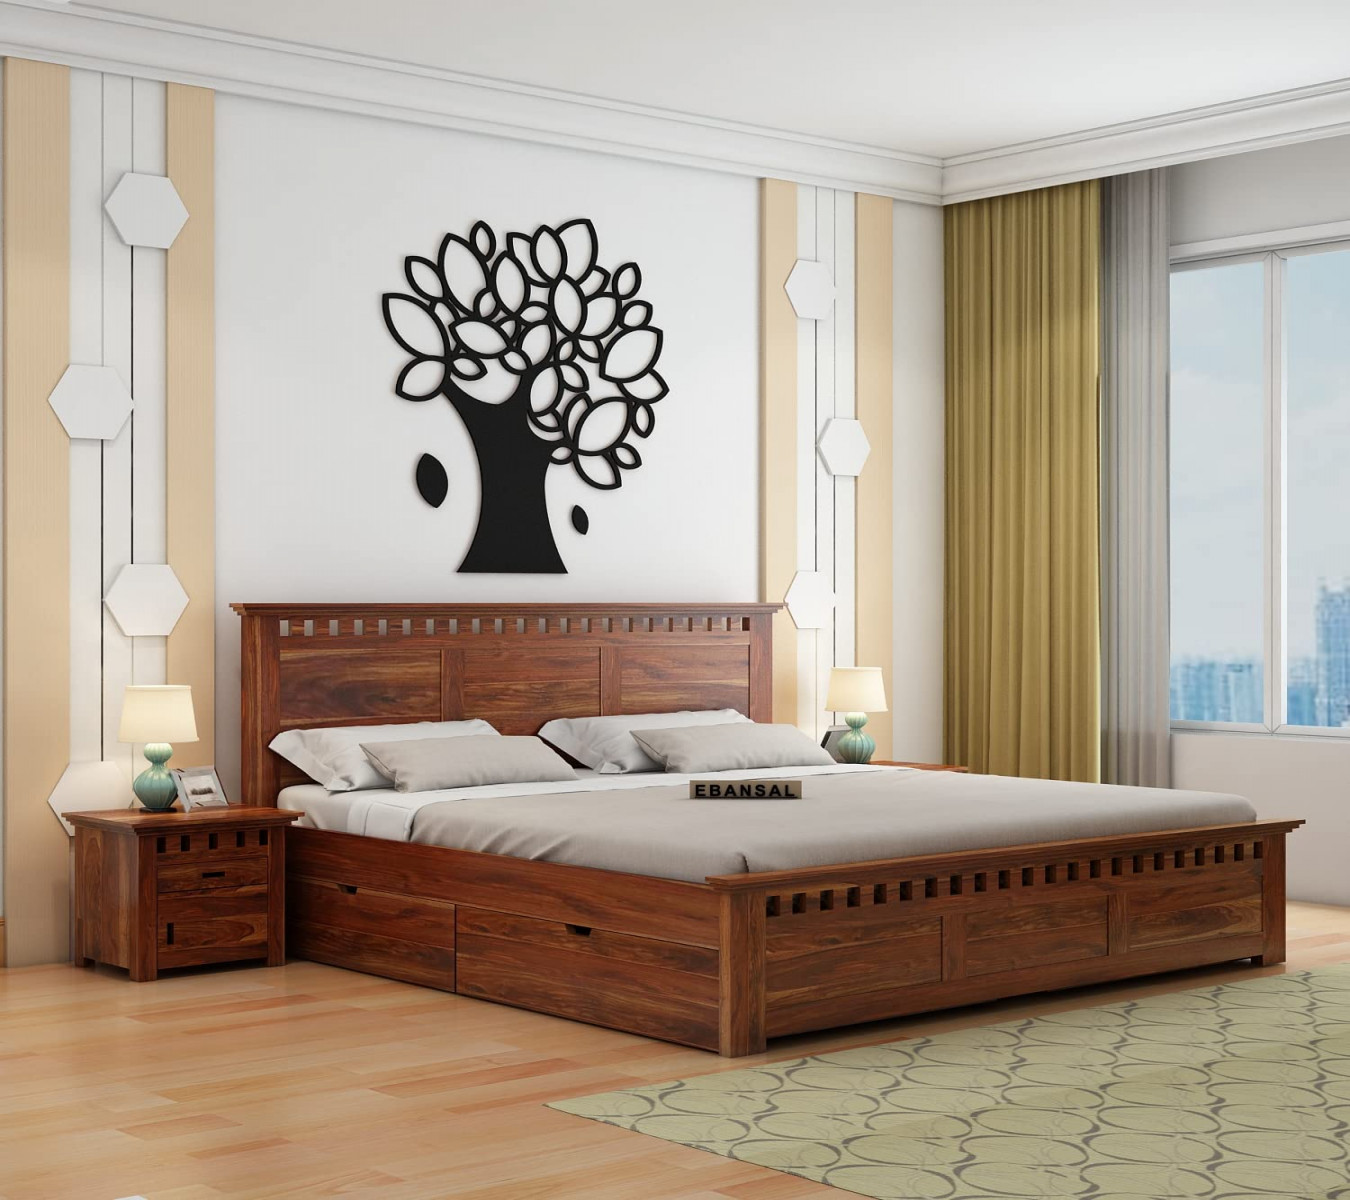 EBANSAL Wooden King Size Bed for Bedroom  Solid Wood Double Bed